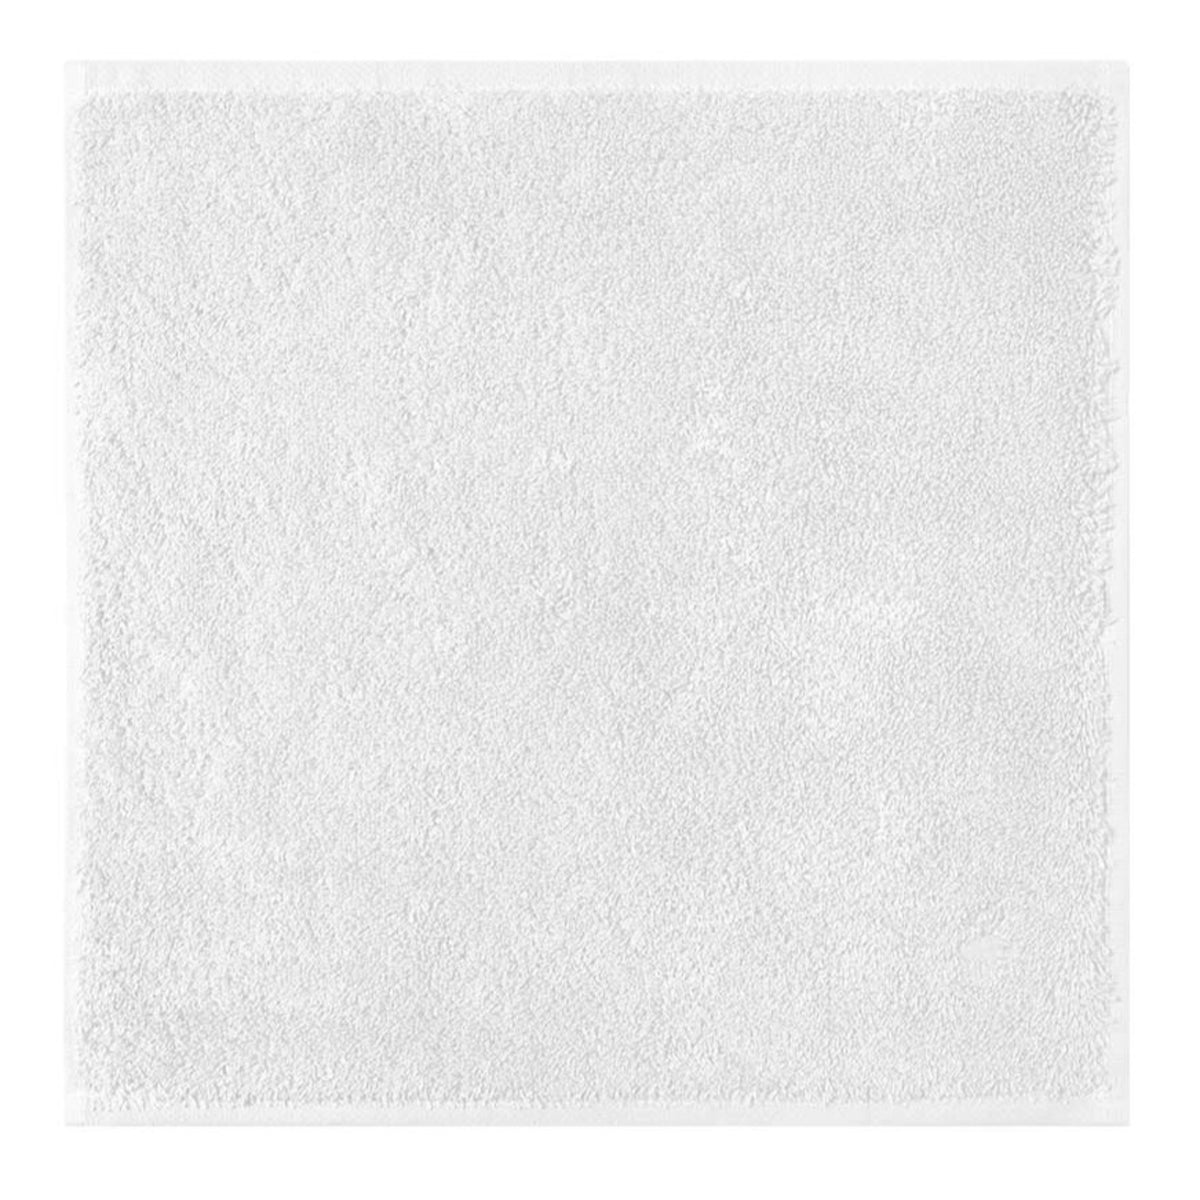 Washcloth of Yves Delorme Etoile Bath Collection in Blanc Color